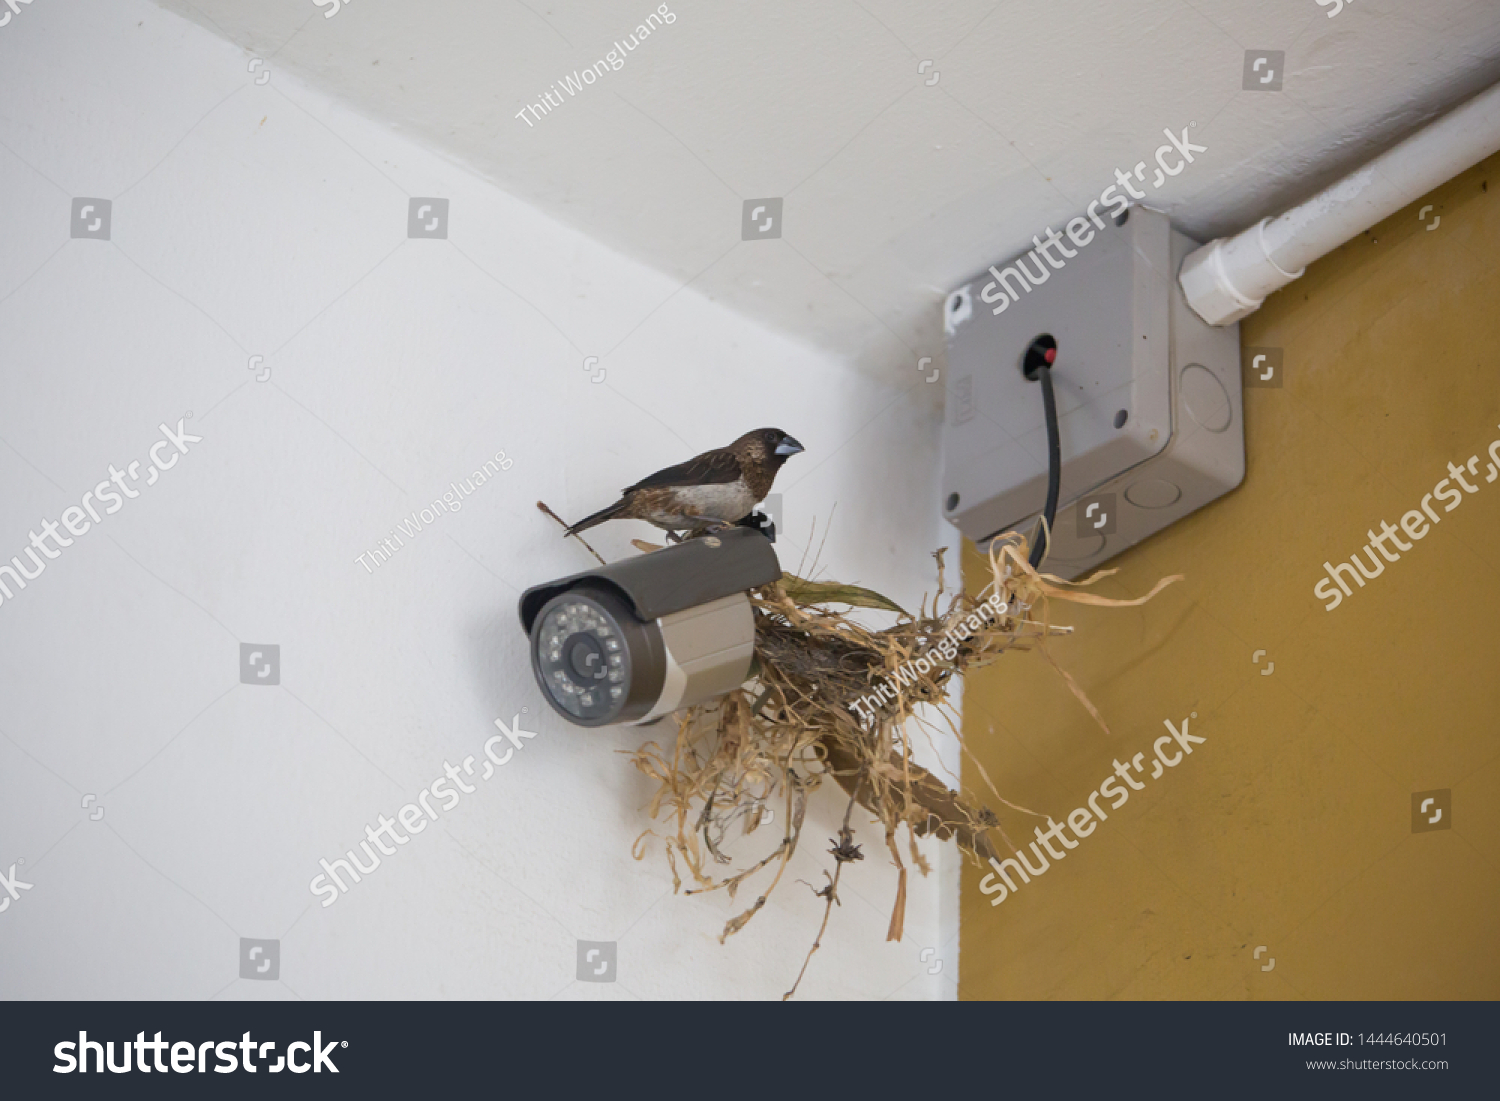 Bird makes nest on cctv camera inside building, a big problem for resident, bird habit might bring disease and cause health problem.  #1444640501